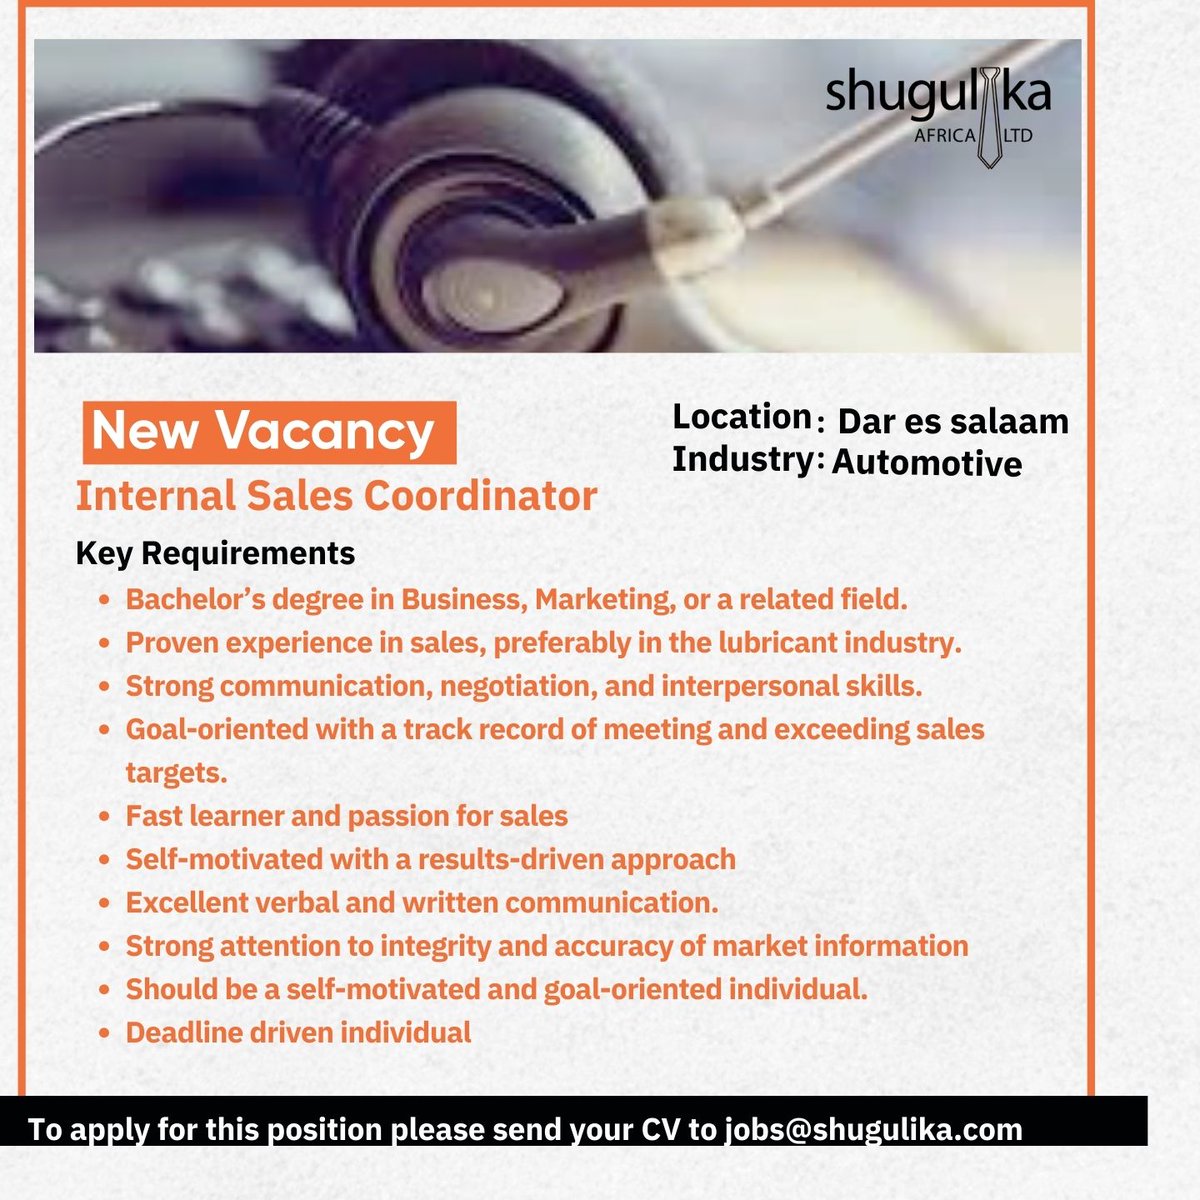 Vacancy: Internal Sales Coordinator 

Send your CV to jobs@shugulika.com

Only shortlisted candidates shall be contacted.

@Shugulika Africa Limited

#shugulika #vacancy #jobs #jobsdar #jobstanzania #lubesales #internalsales #salescoordinator